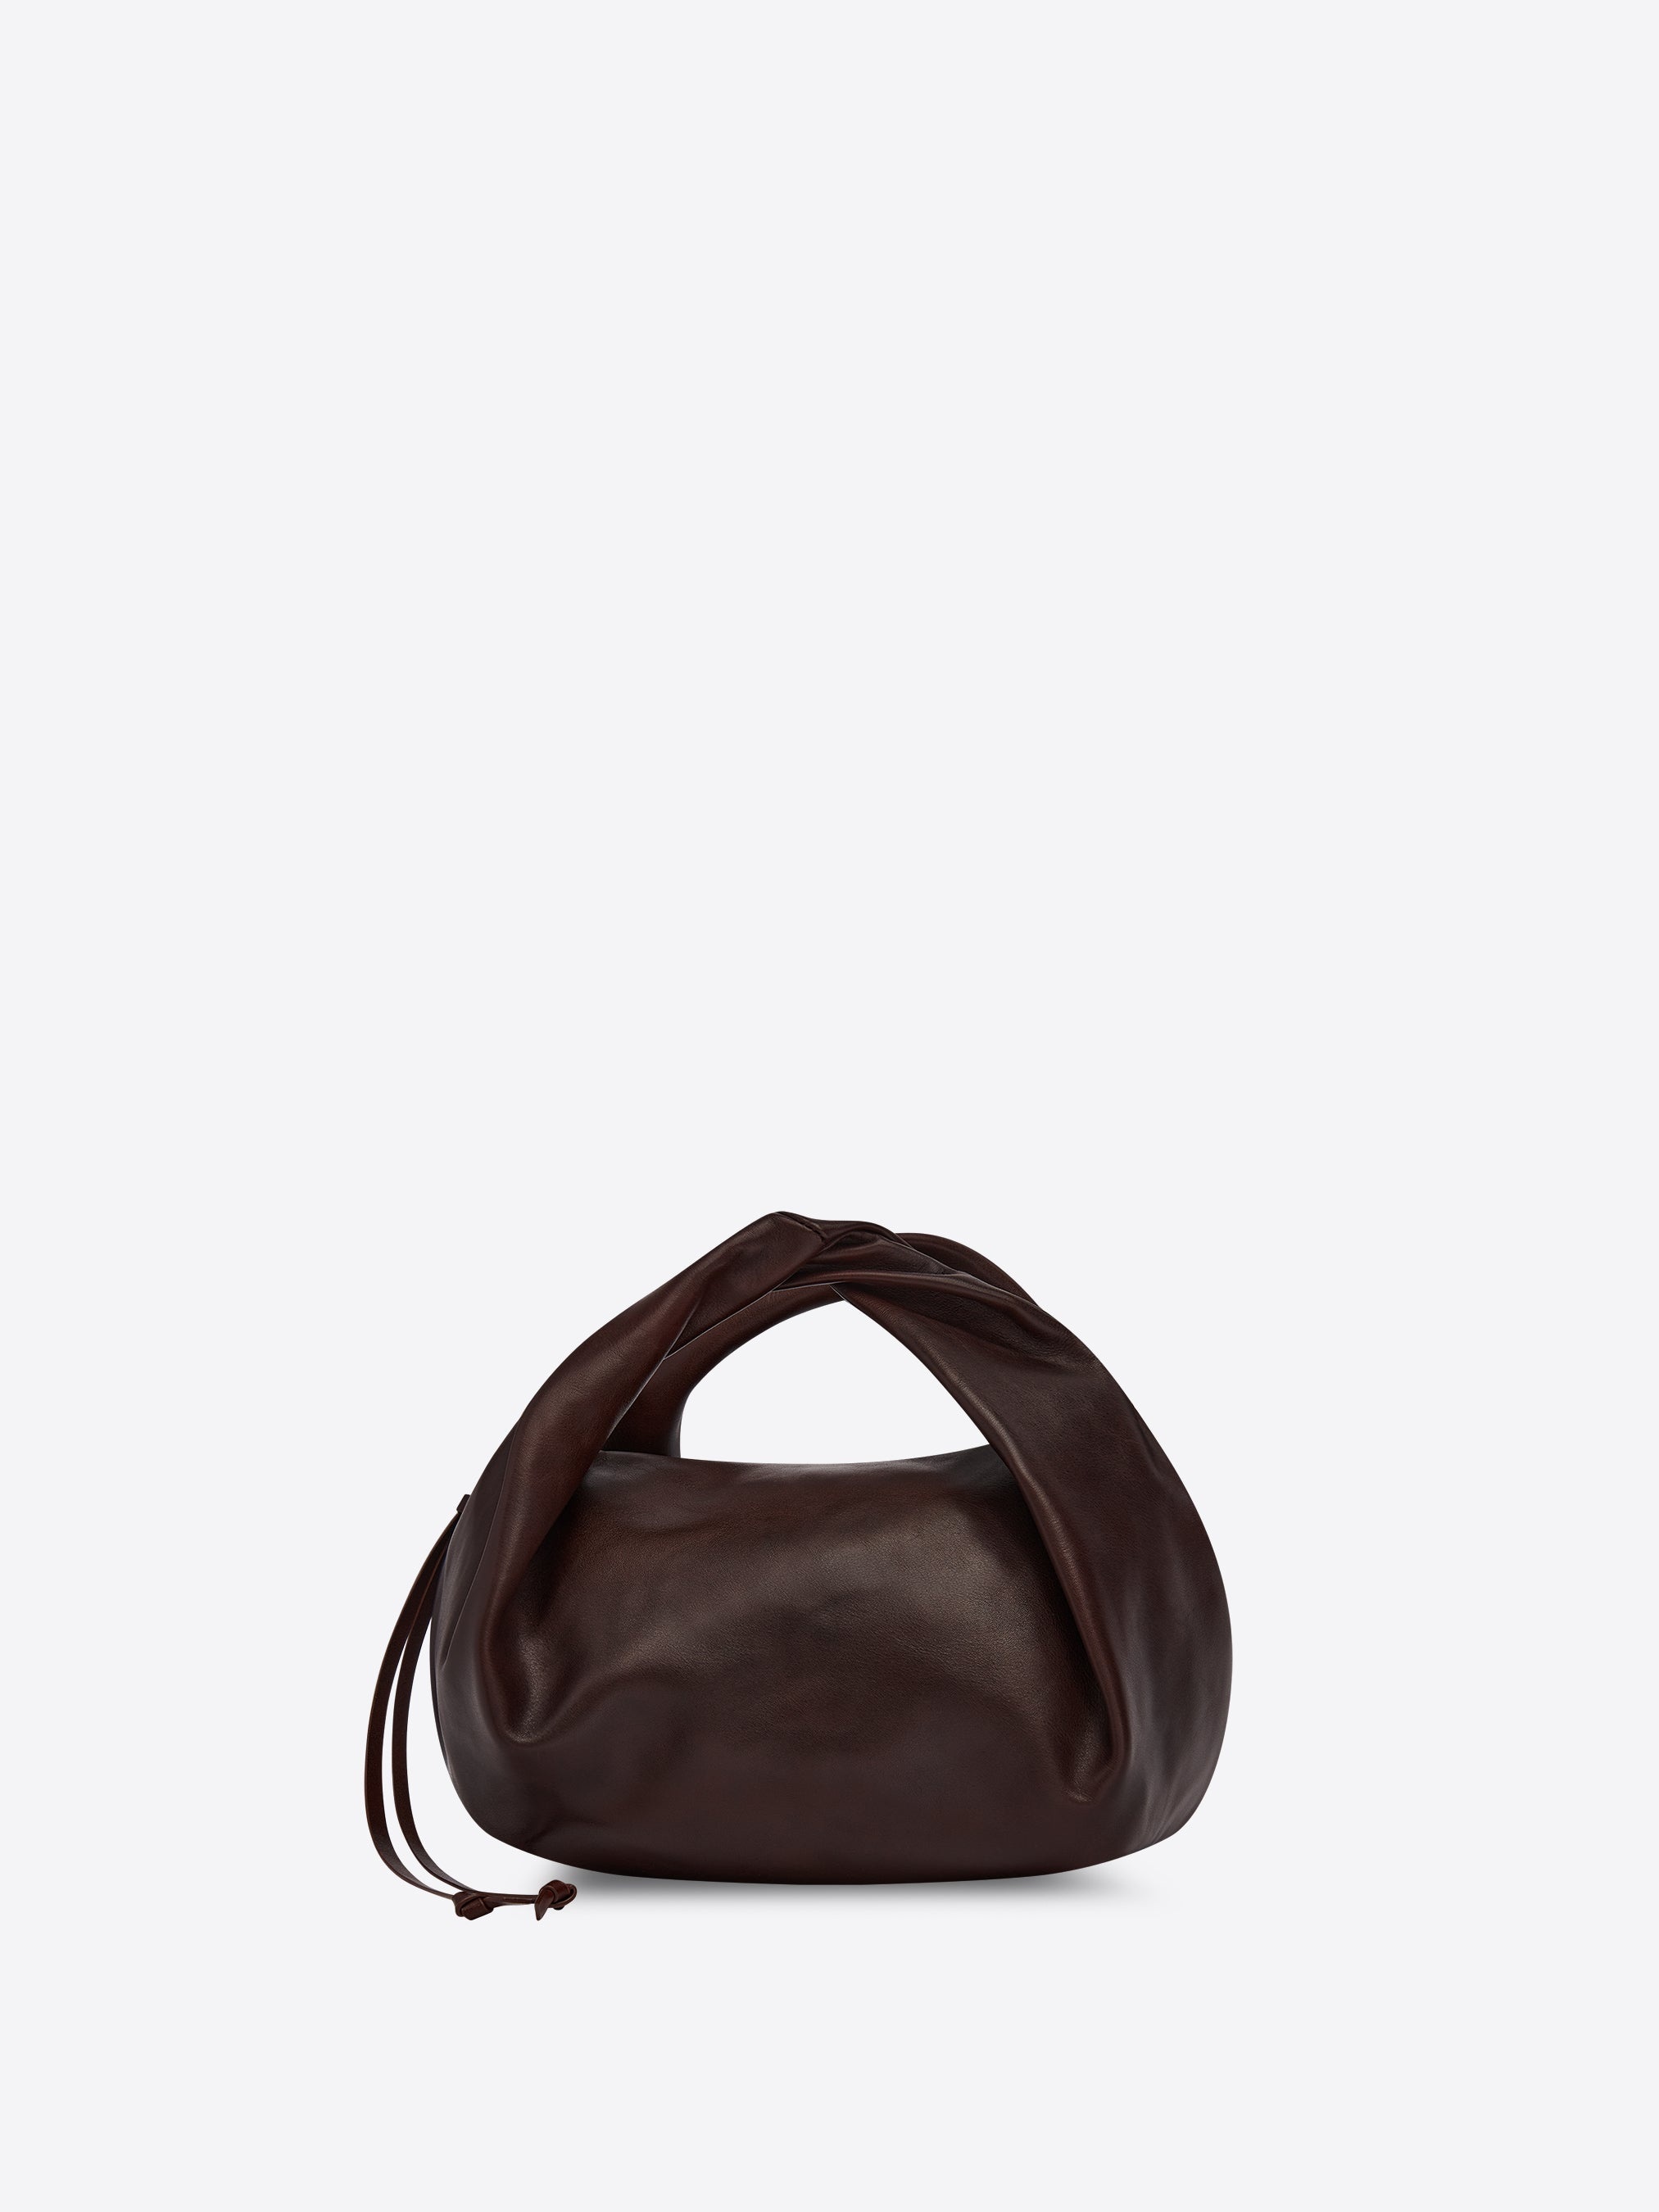 LEATHER TOTE - 1